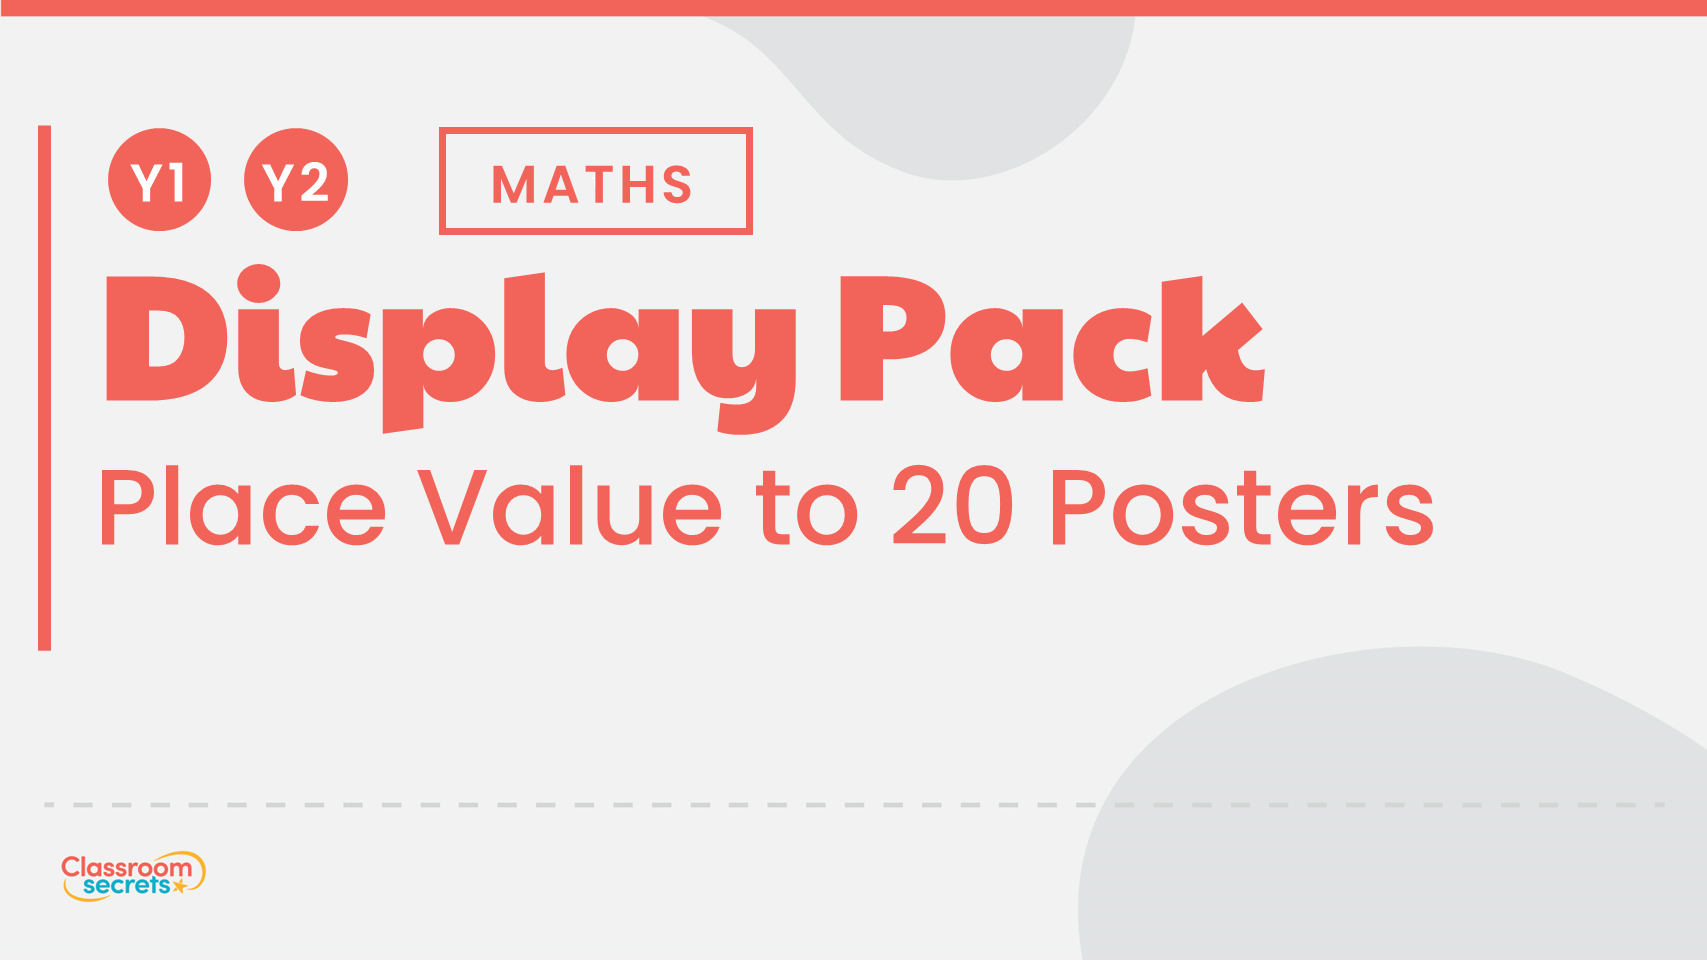 Place Value to 20 Year 1 Display Pack